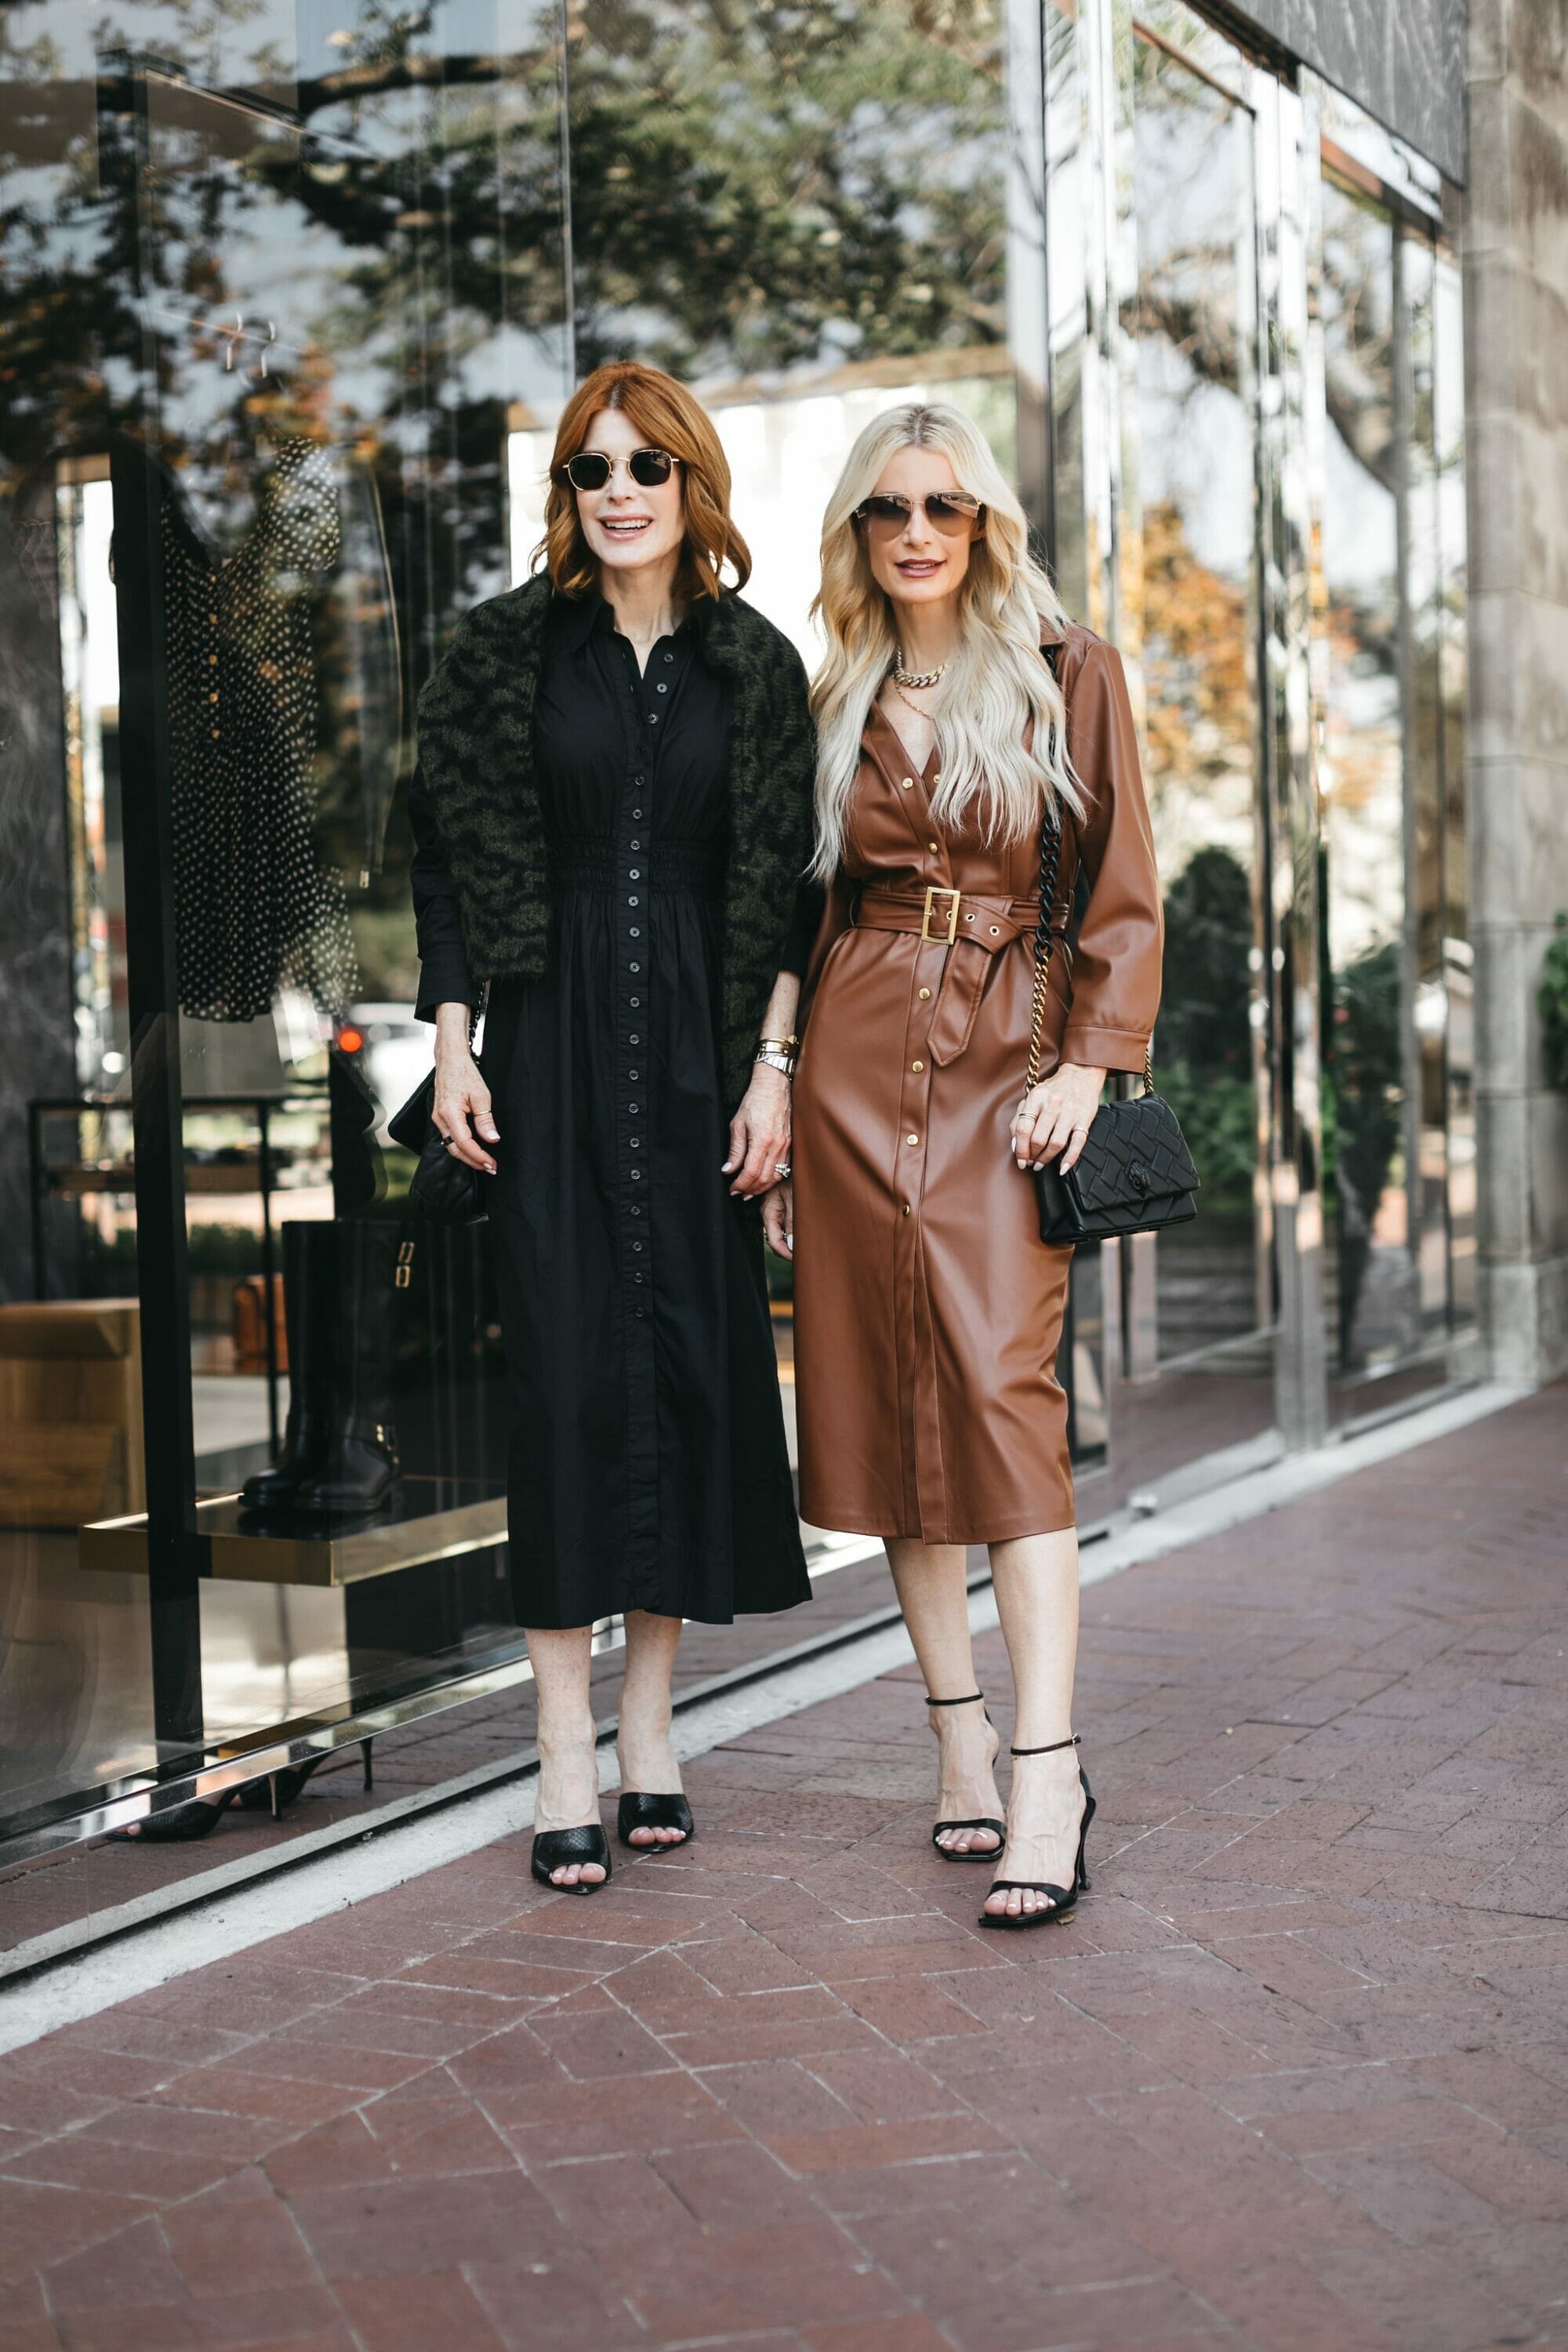 Over 40 fashion bloggers from Dallas wearing a brown leather dress and a black sweater dress as 2 fall dresses for every occasion.